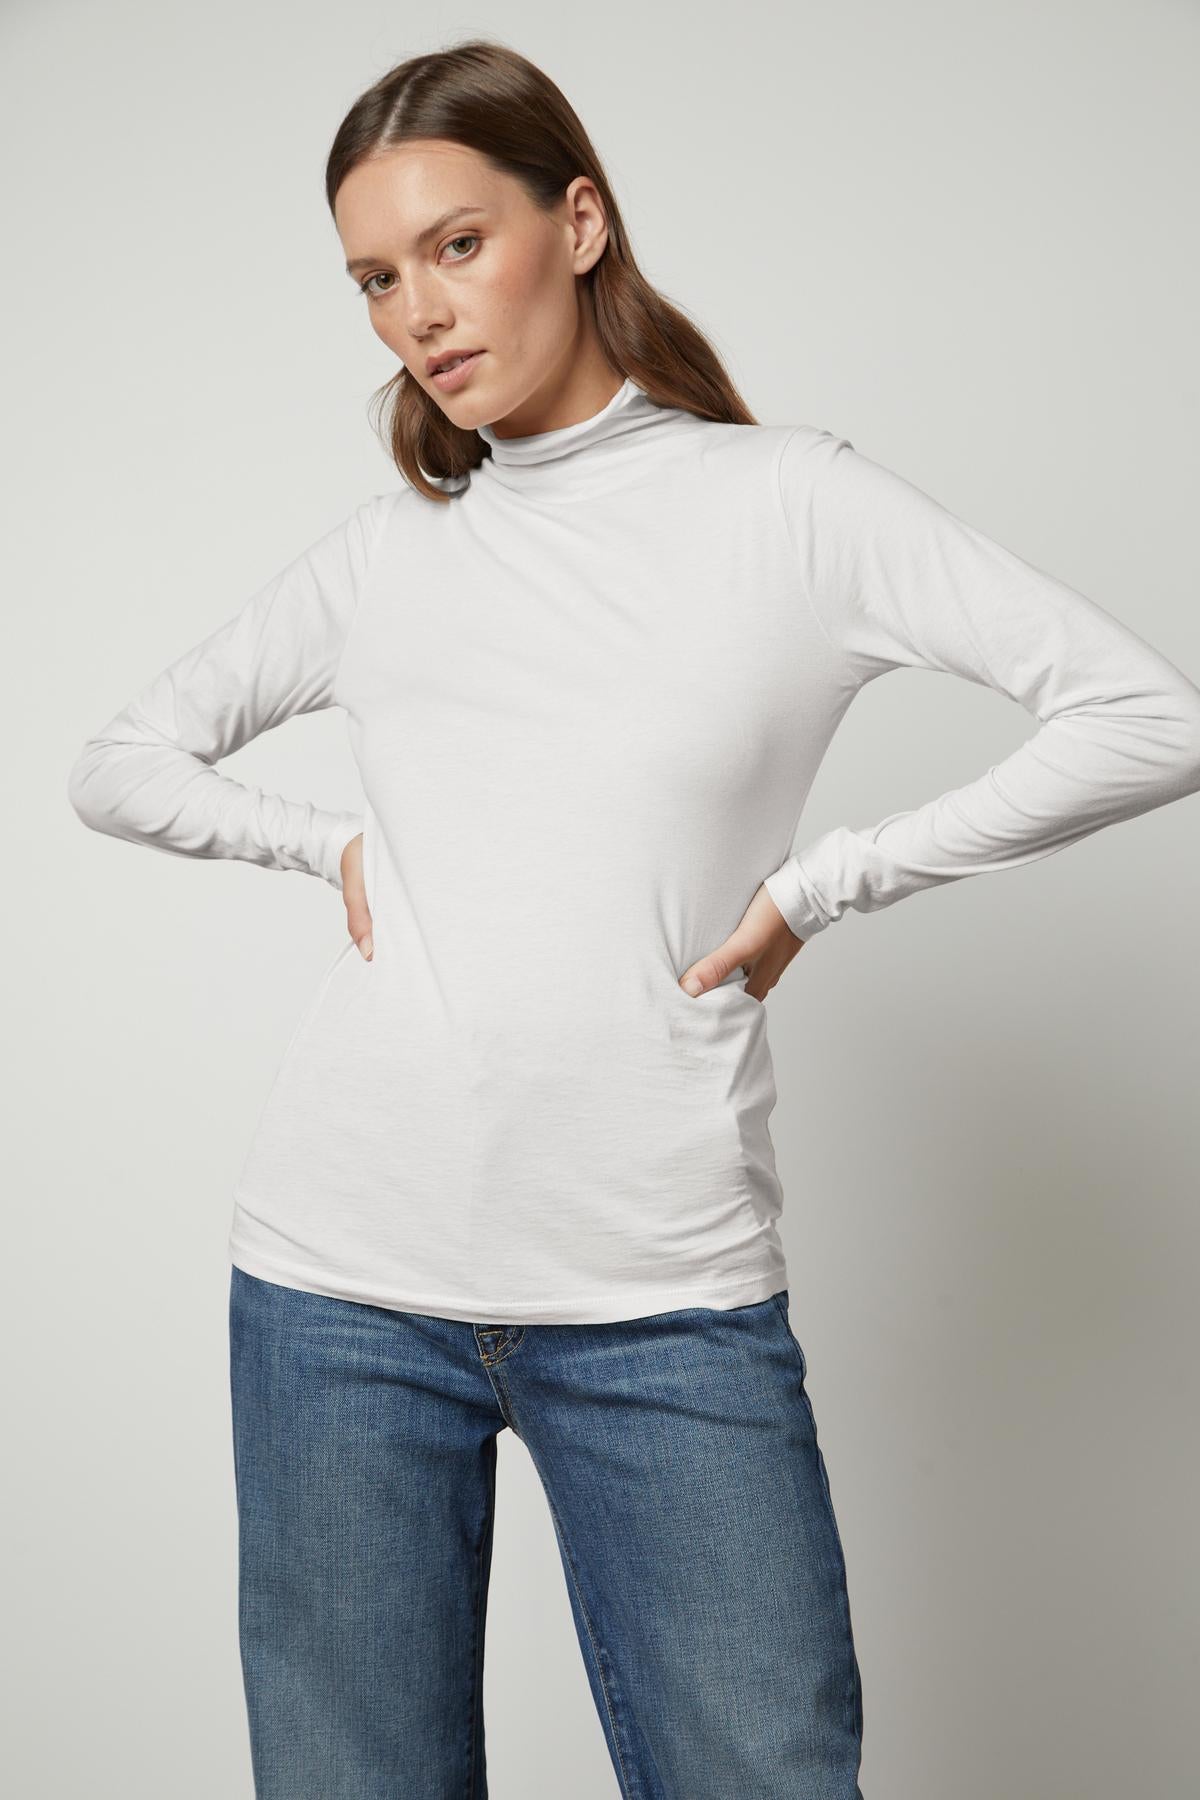   The model is wearing a white TALISIA GAUZY WHISPER FITTED MOCK NECK TEE by Velvet by Graham & Spencer. 